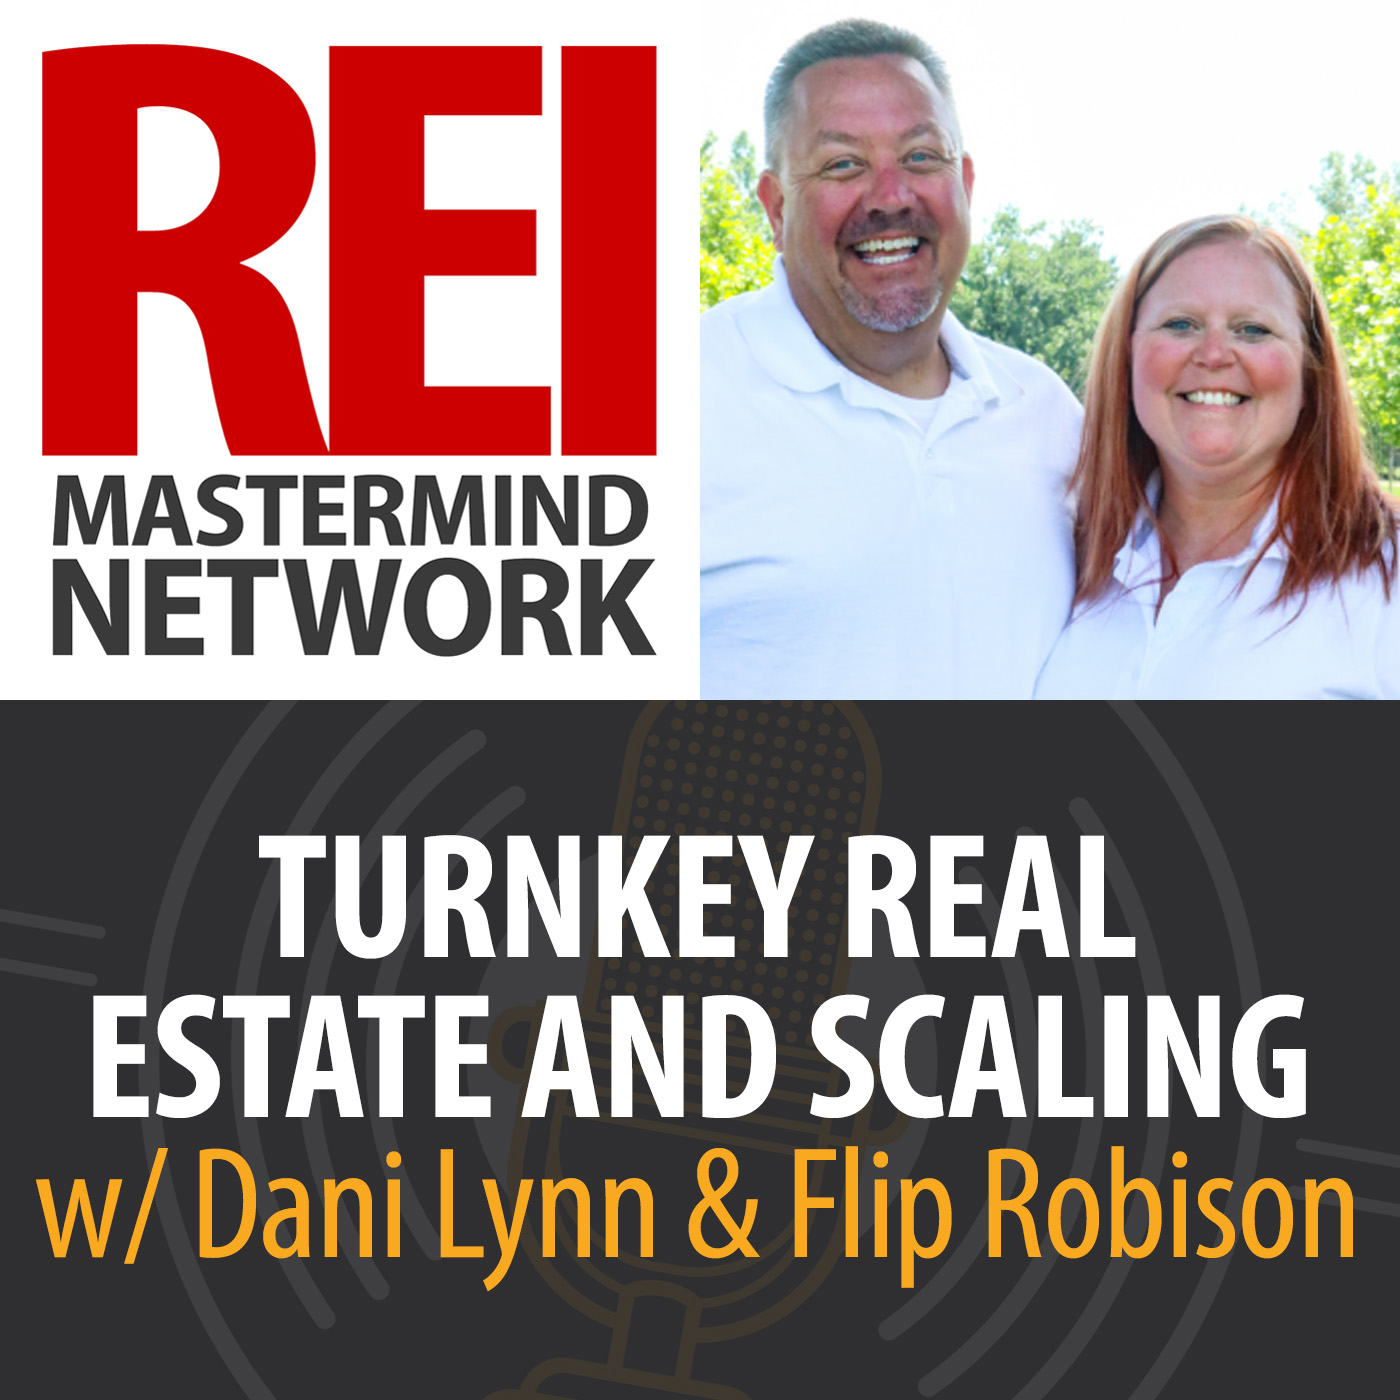 Turnkey Real Estate and Scaling with Dani Lynn and Flip Robison Image